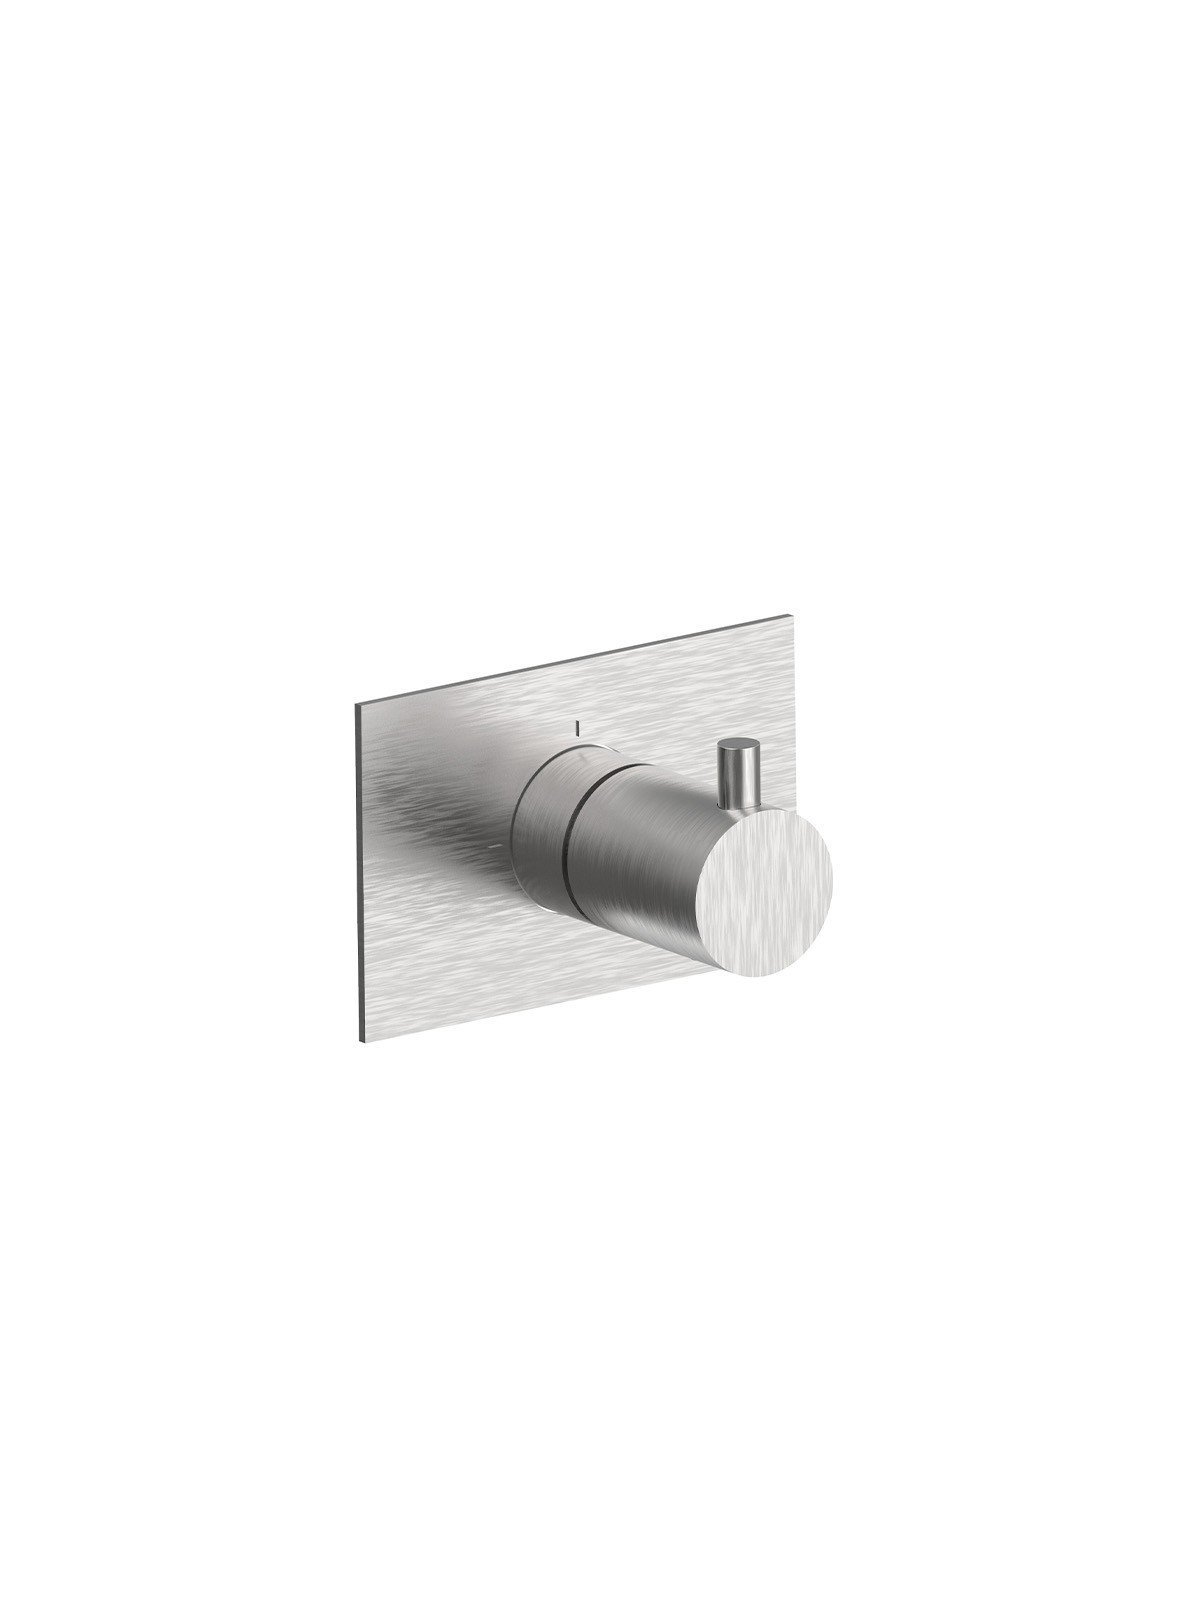 ½” stainless steel built-in straight stop cock (2 pcs. Pack)